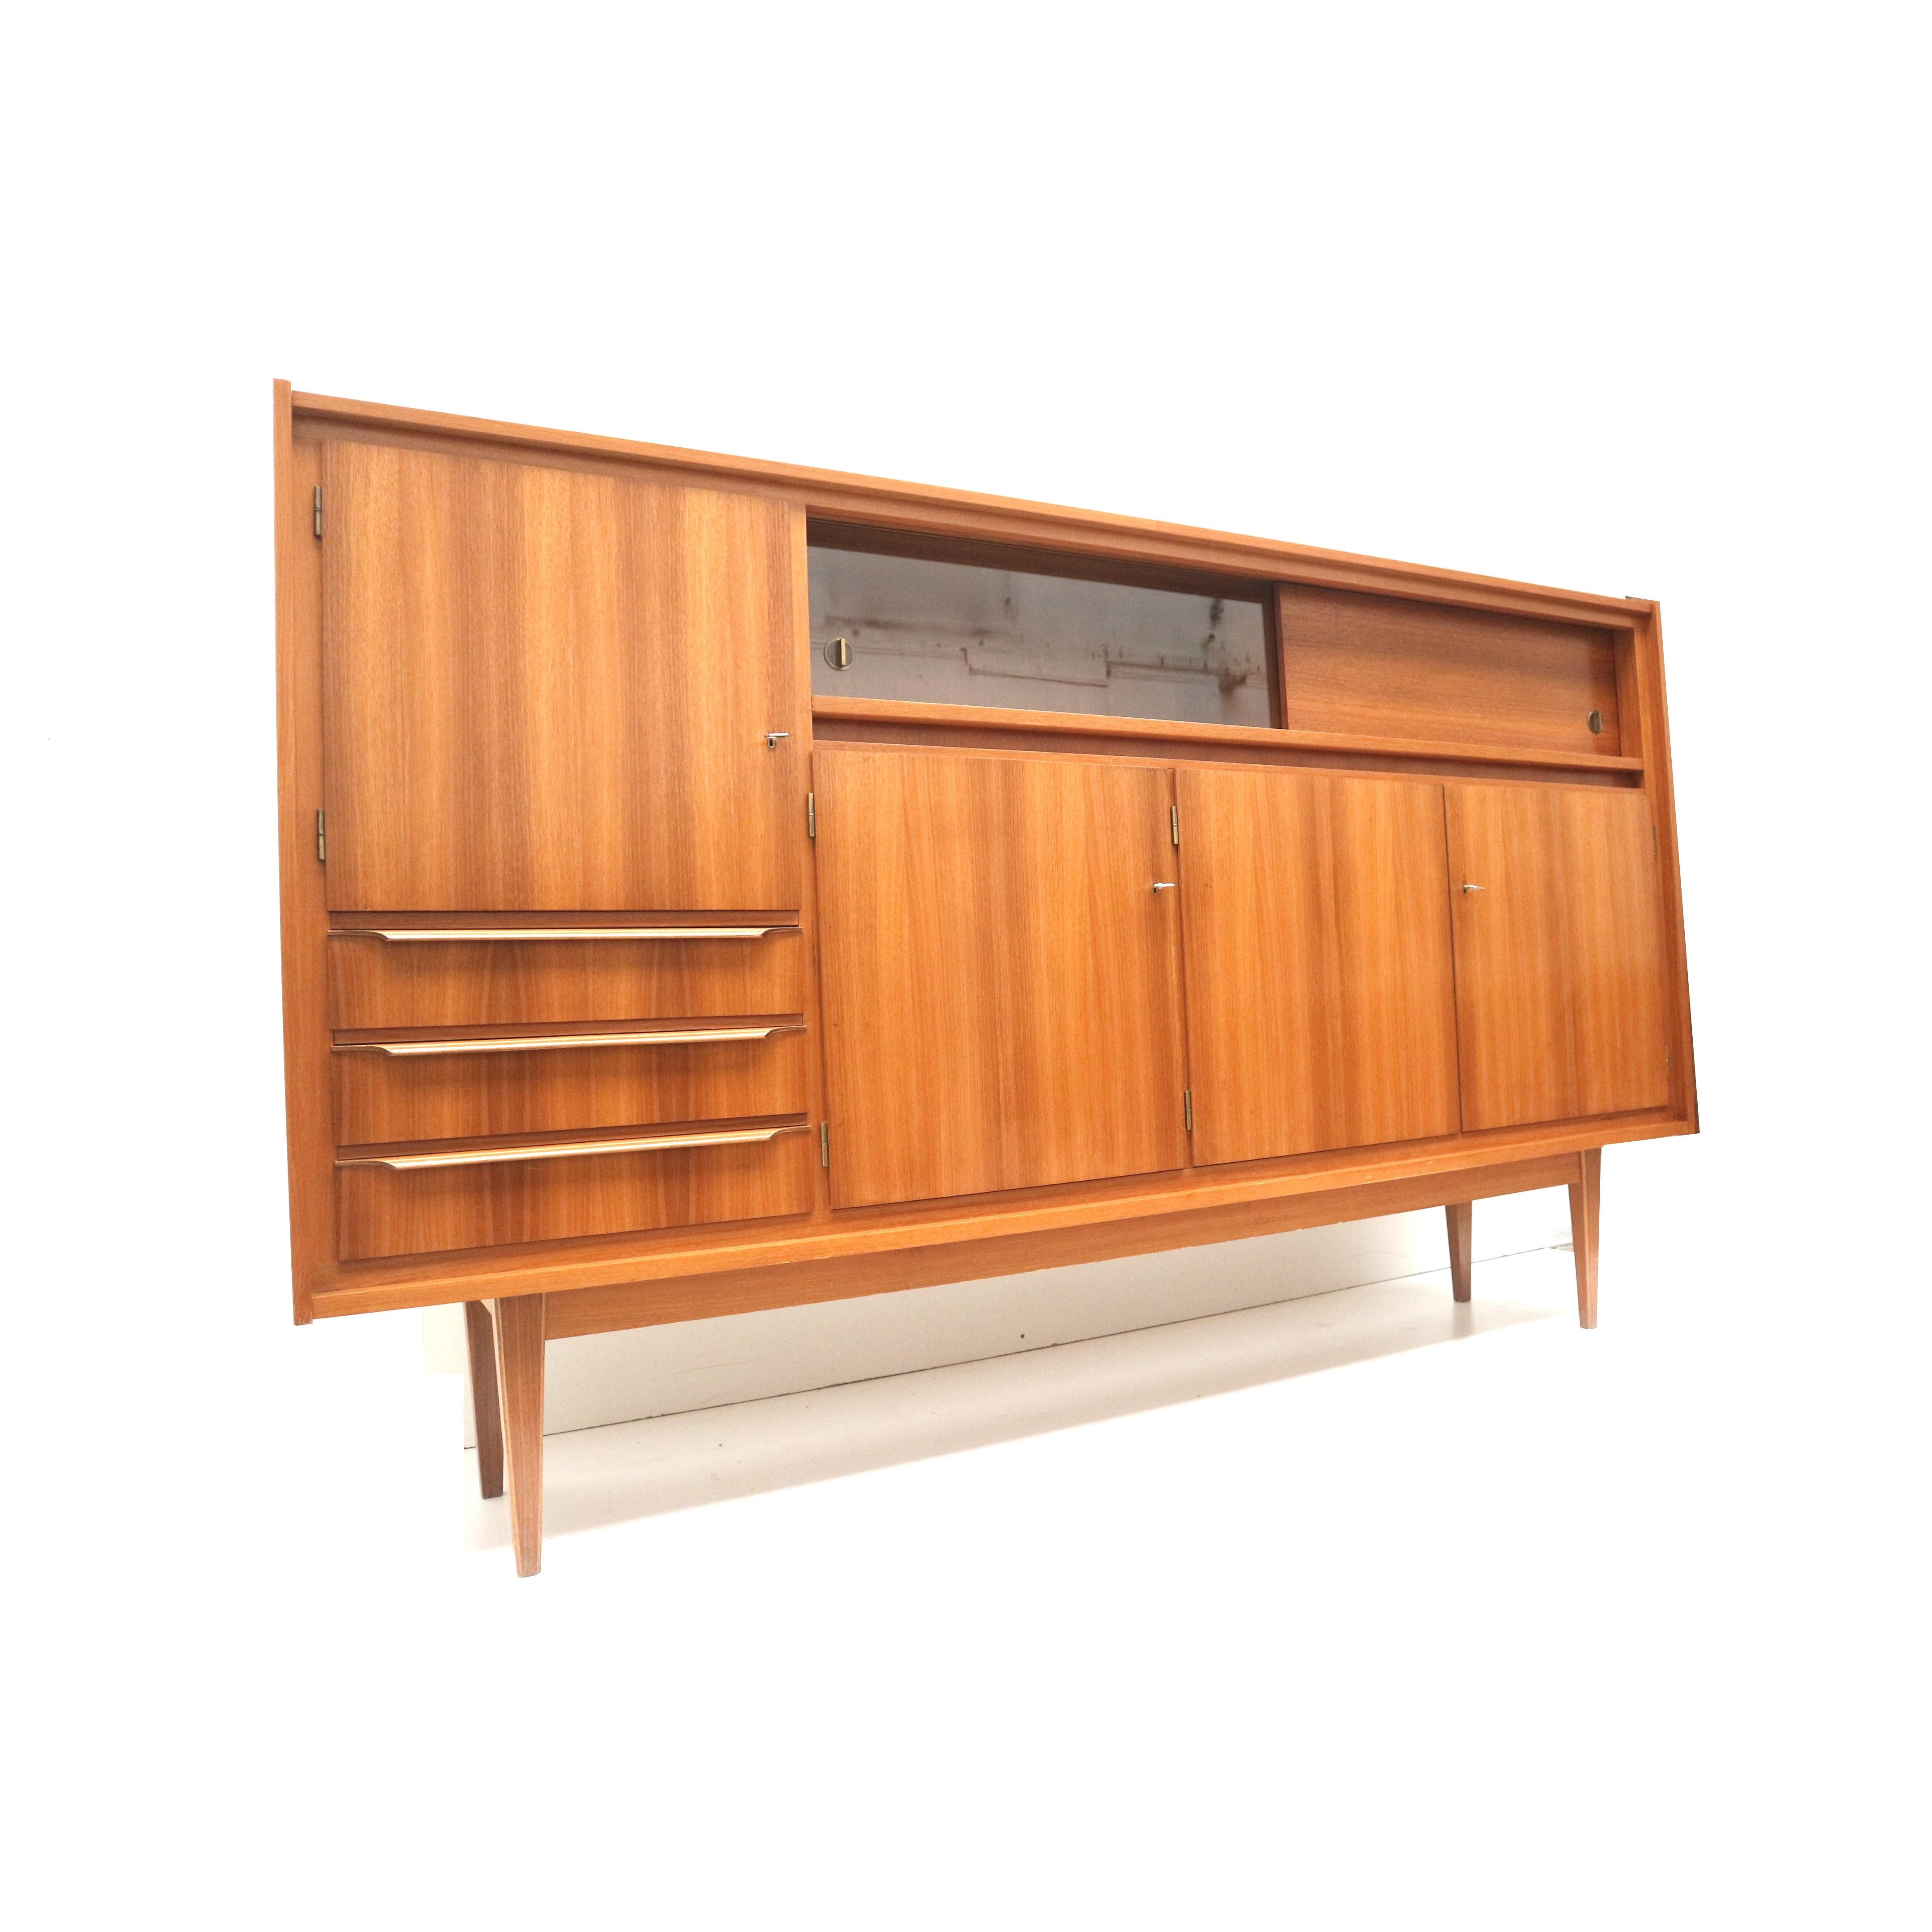 Large vintage high sideboard / highboard made in the 60s.

Dimensions:
Width: 250.3 cm
Height: 146.5 cm
Depth: 44.1 cm